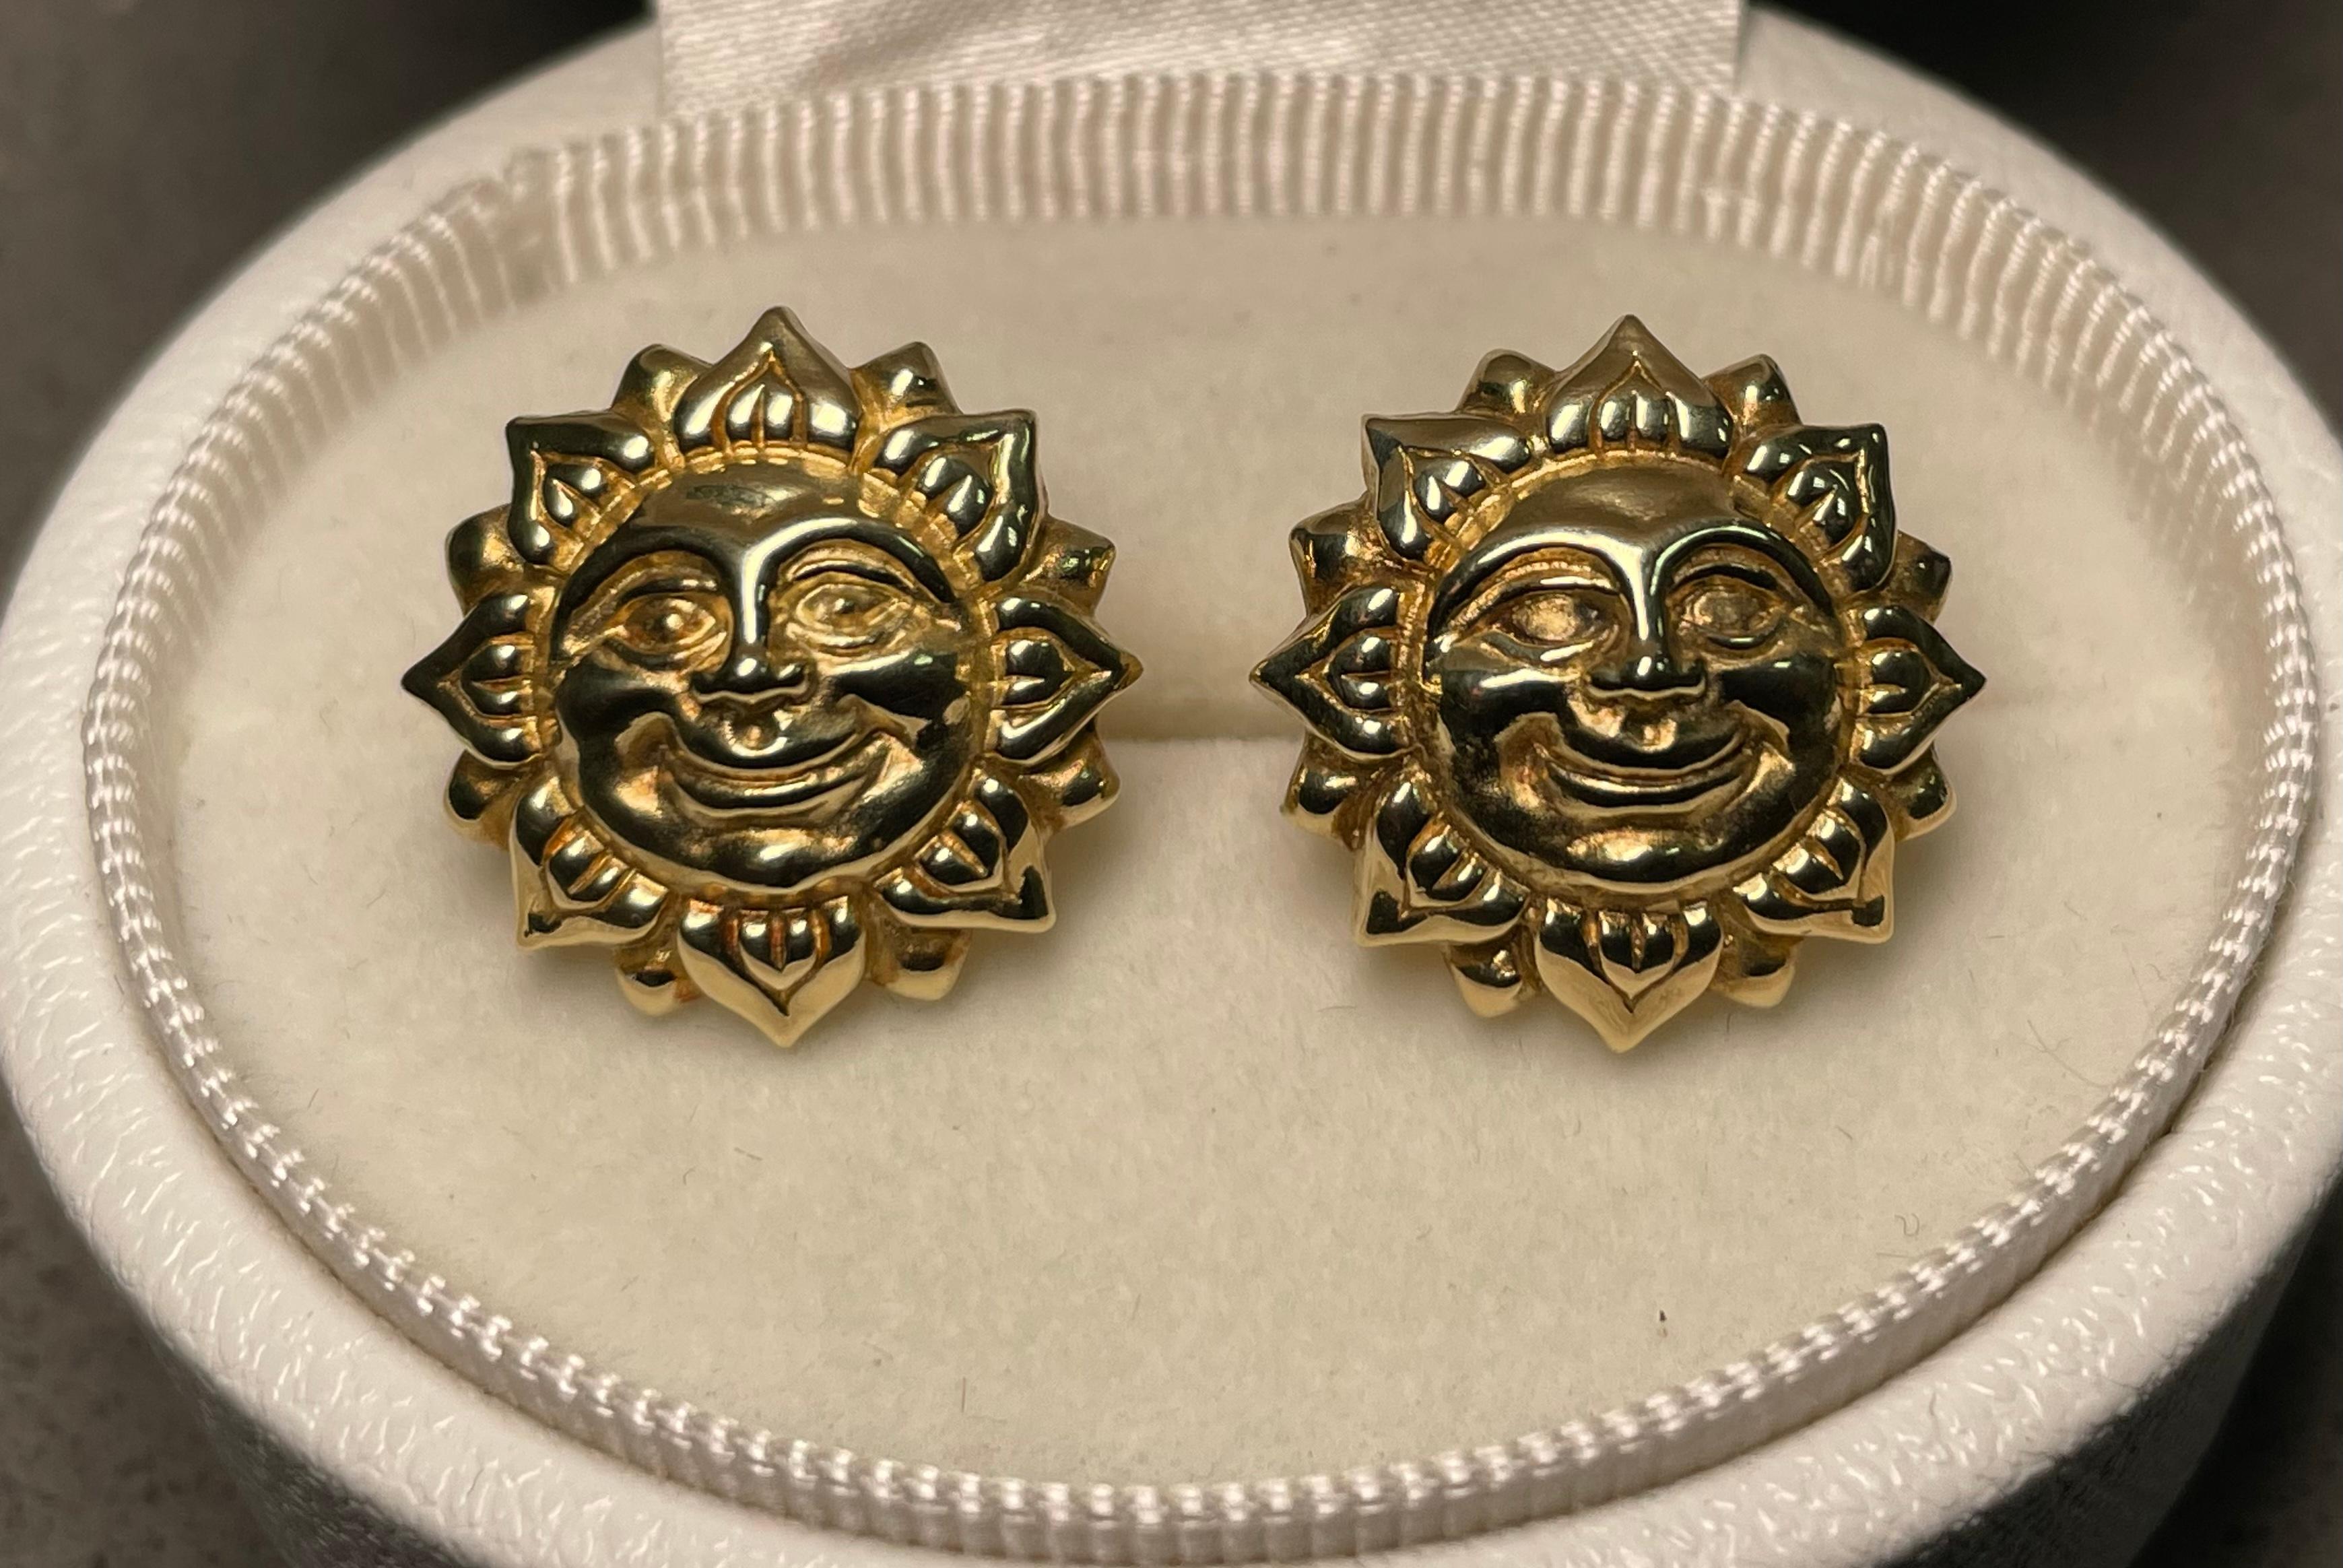 This is an 18k yellow gold pair of whale back cufflinks. They depict a smiling sun face. They are hallmarked 18k in their links. They are rare and full of details.